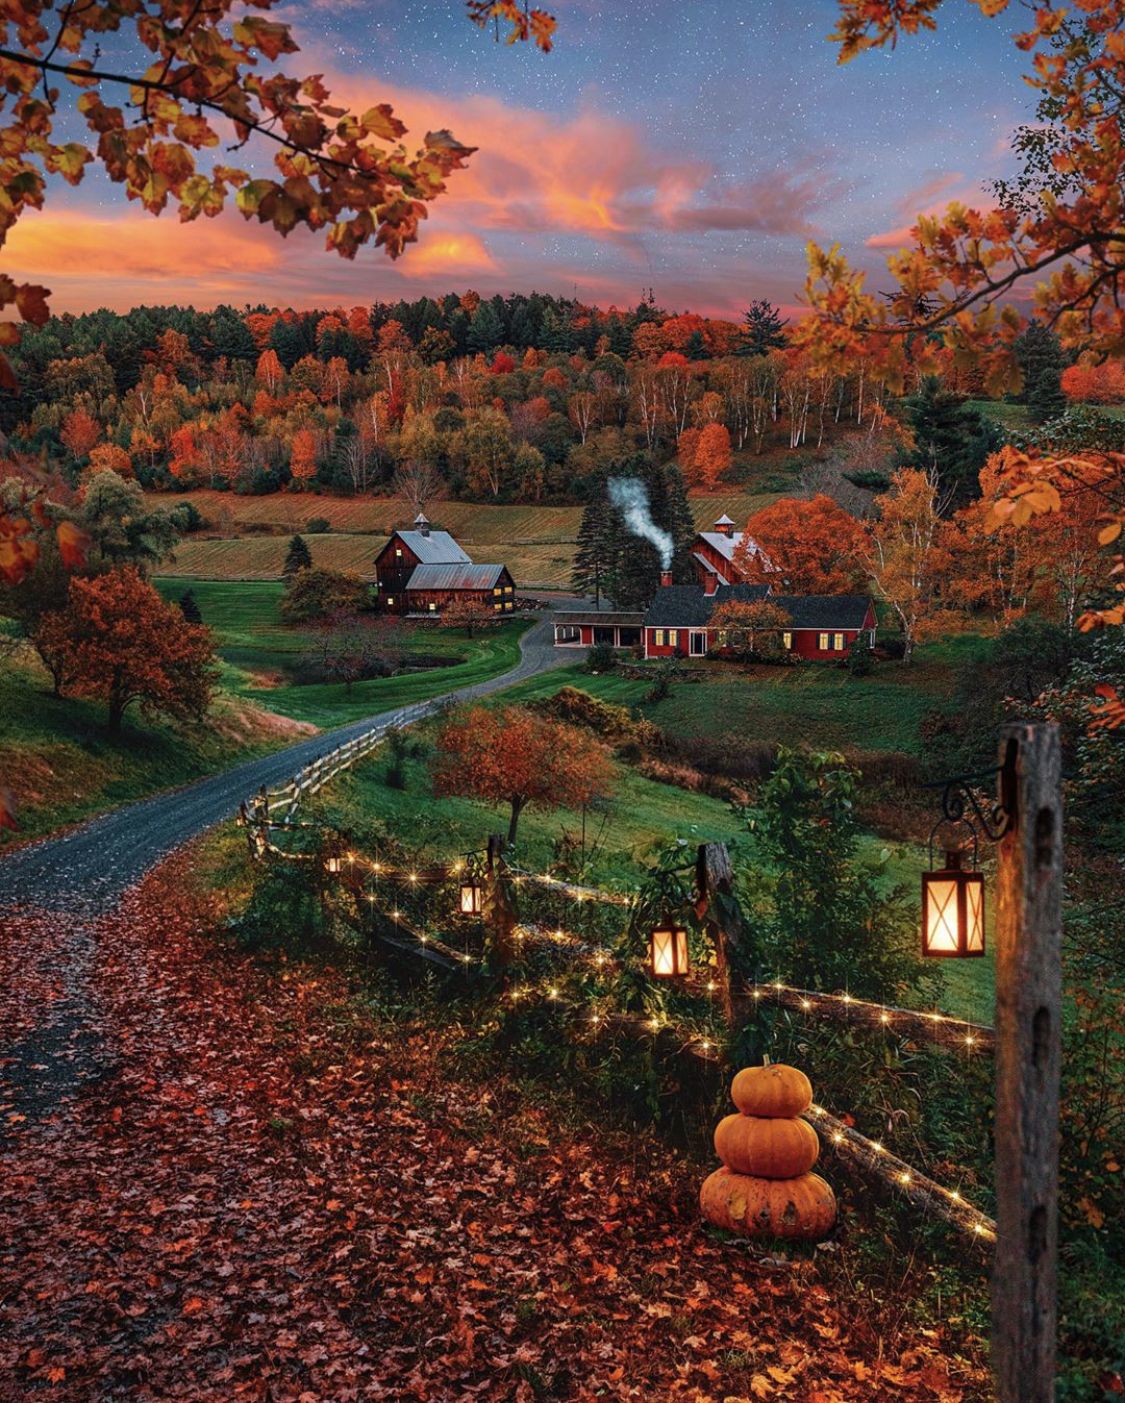 Getting Ready for Fall in New England. By Georgia Grace. Autumn scenery, Autumn photography, Autumn scenes